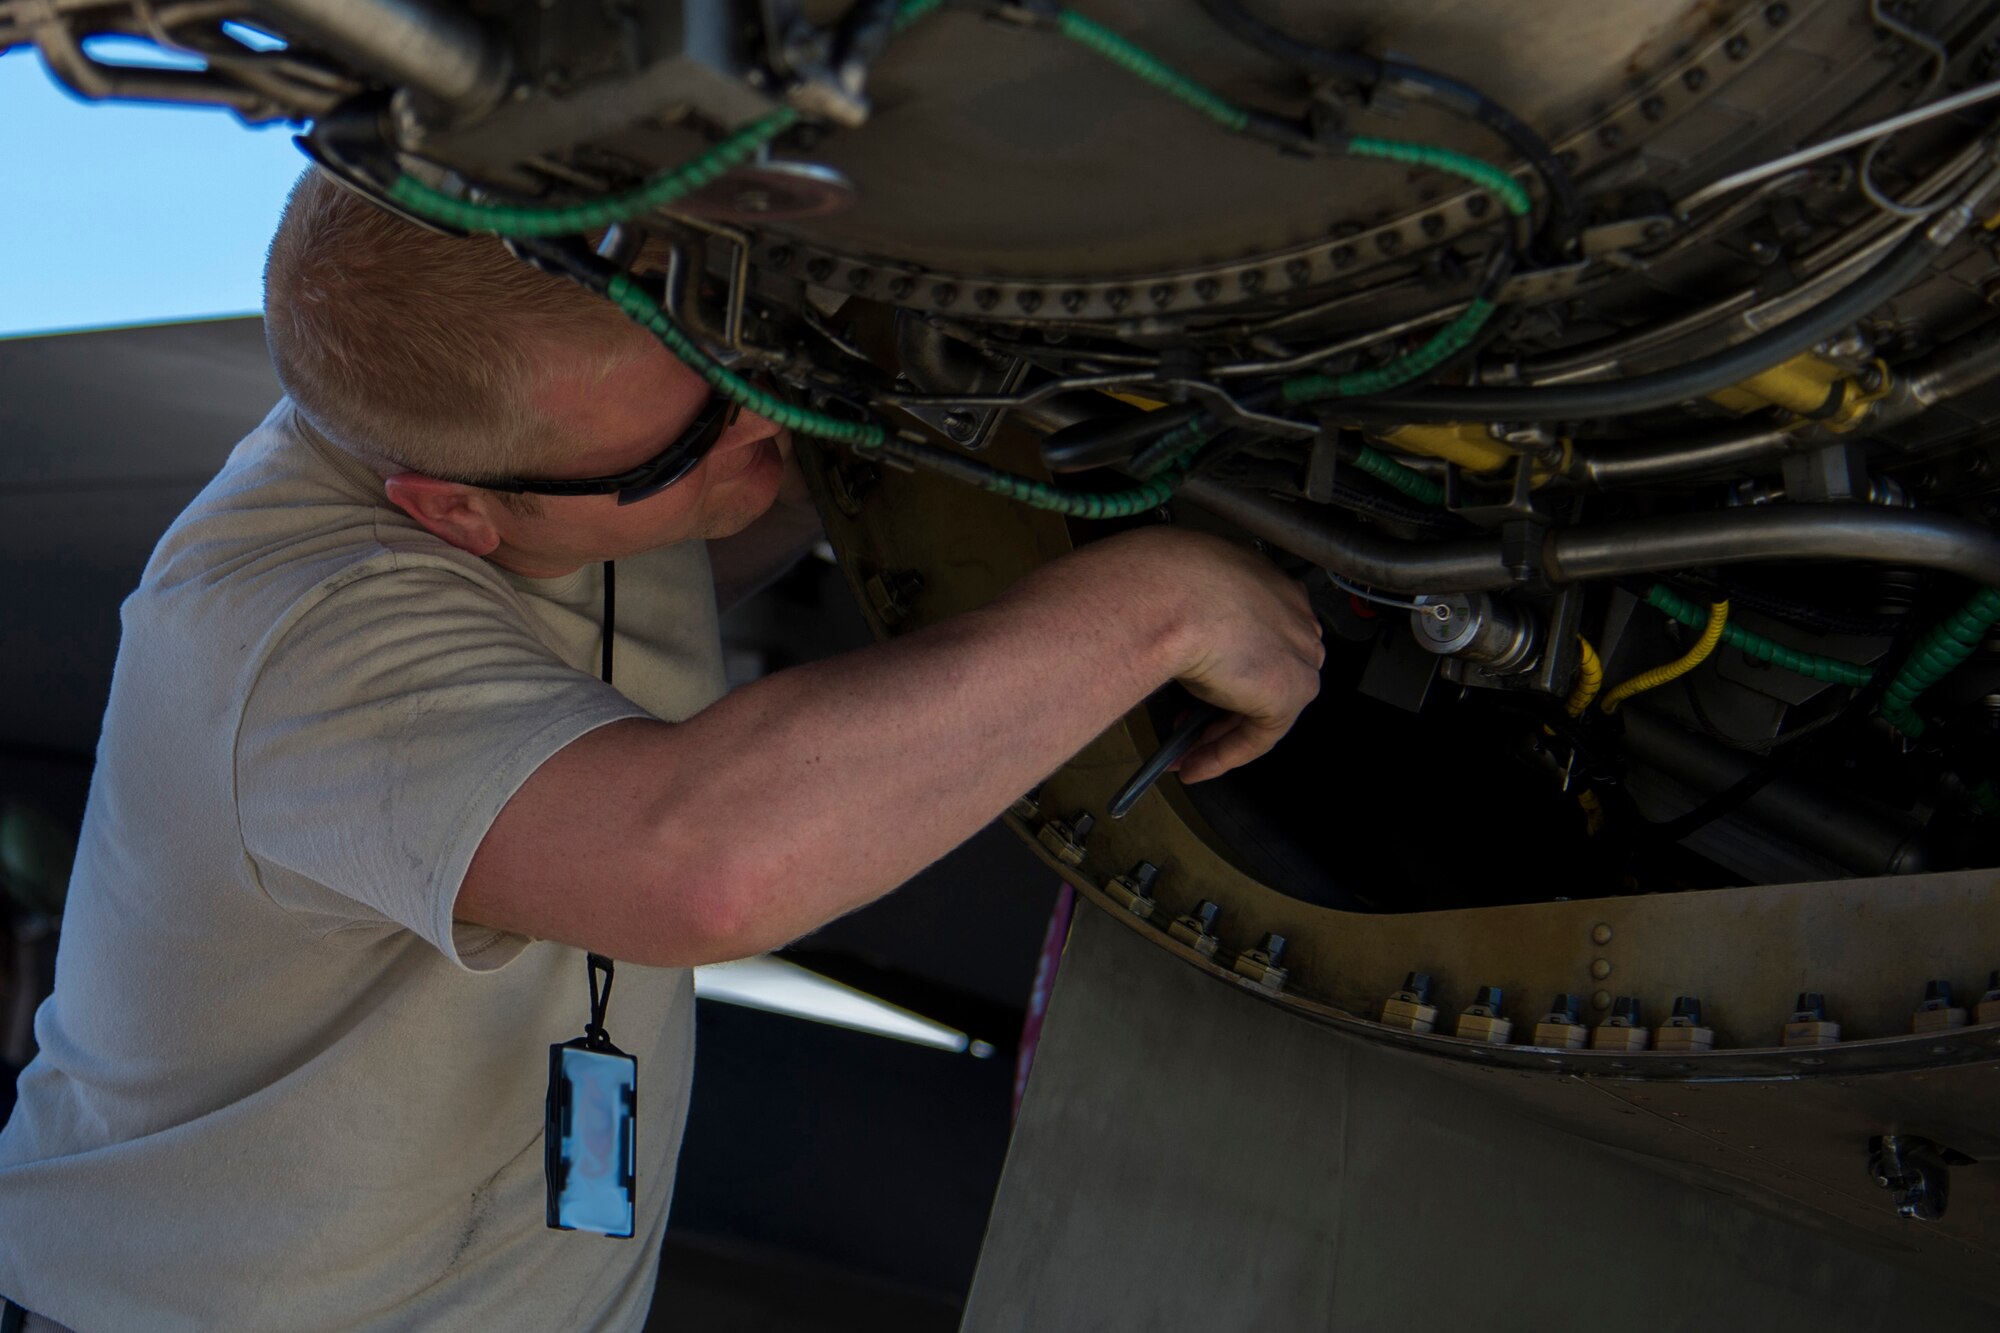 BEJA AIR BASE, Portugal – U.S. Air Force Staff Sgt. Christopher Lancaster, 52nd Component Maintenance Squadron aerospace propulsion technician, works on the engine of an F-16 Fighting Falcon fighter aircraft, assigned to the 480th Fighter Squadron at Spangdahlem Air Base, Germany, before it participates in Trident Juncture 2015 at Beja Air Base, Portugal, Oct. 22, 2015. NATO exercises such as Trident Juncture provide an excellent venue for current and hopeful NATO members to work on their warfighting, communication and coordination skills. (U.S. Air Force photo illustration by Airman 1st Class Luke Kitterman/Released)